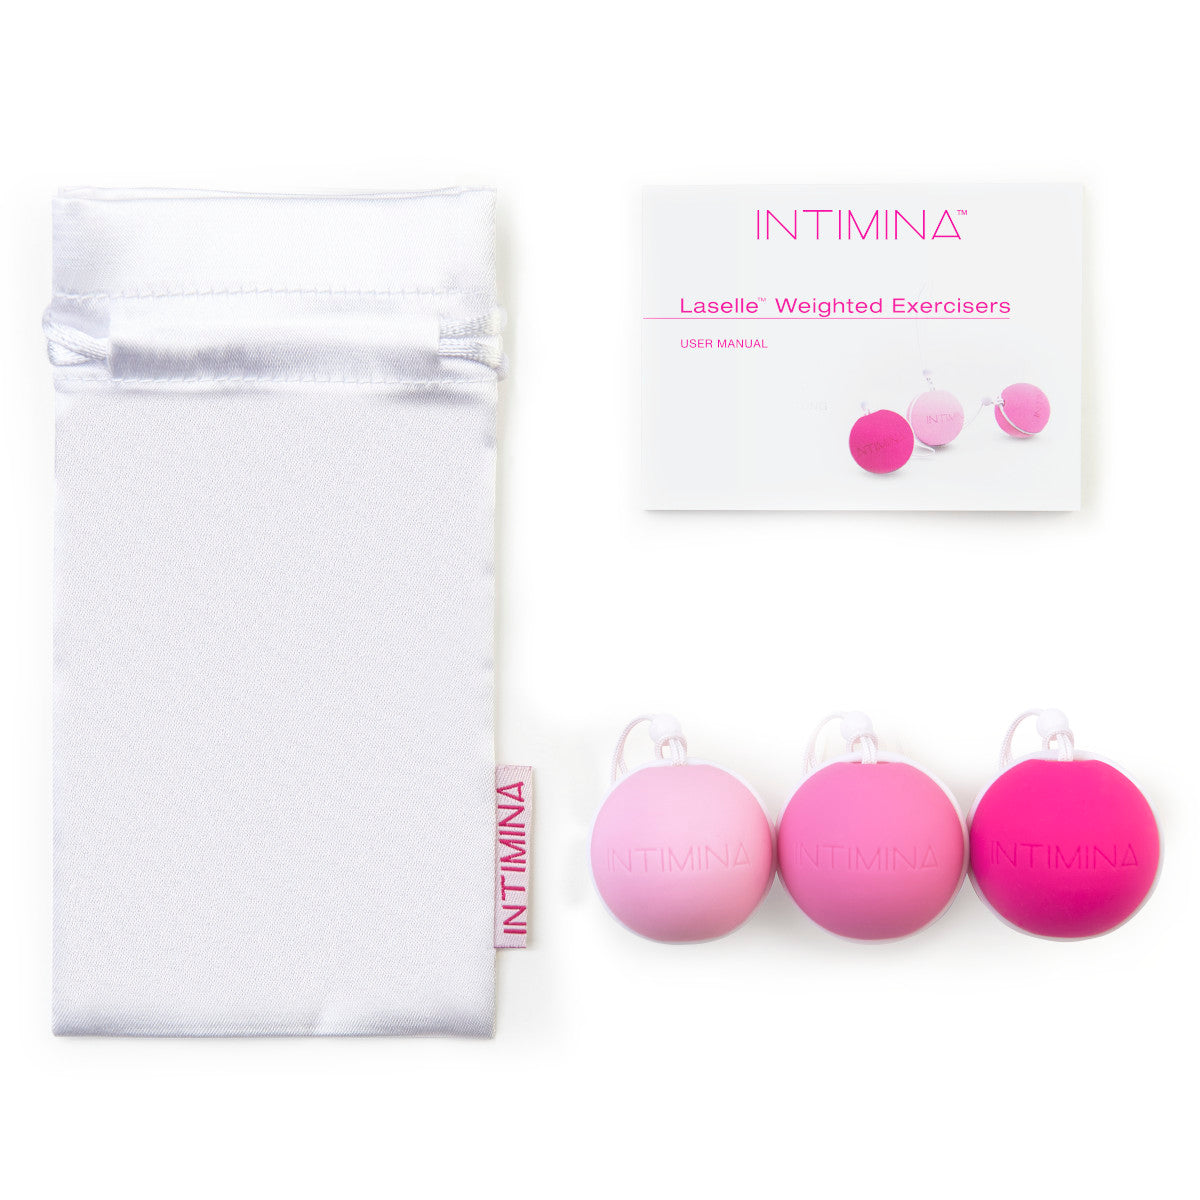 Intimina Laselle Routine Exercise Balls SET of 3 Pelvic Floor Weights Intimates Adult Boutique